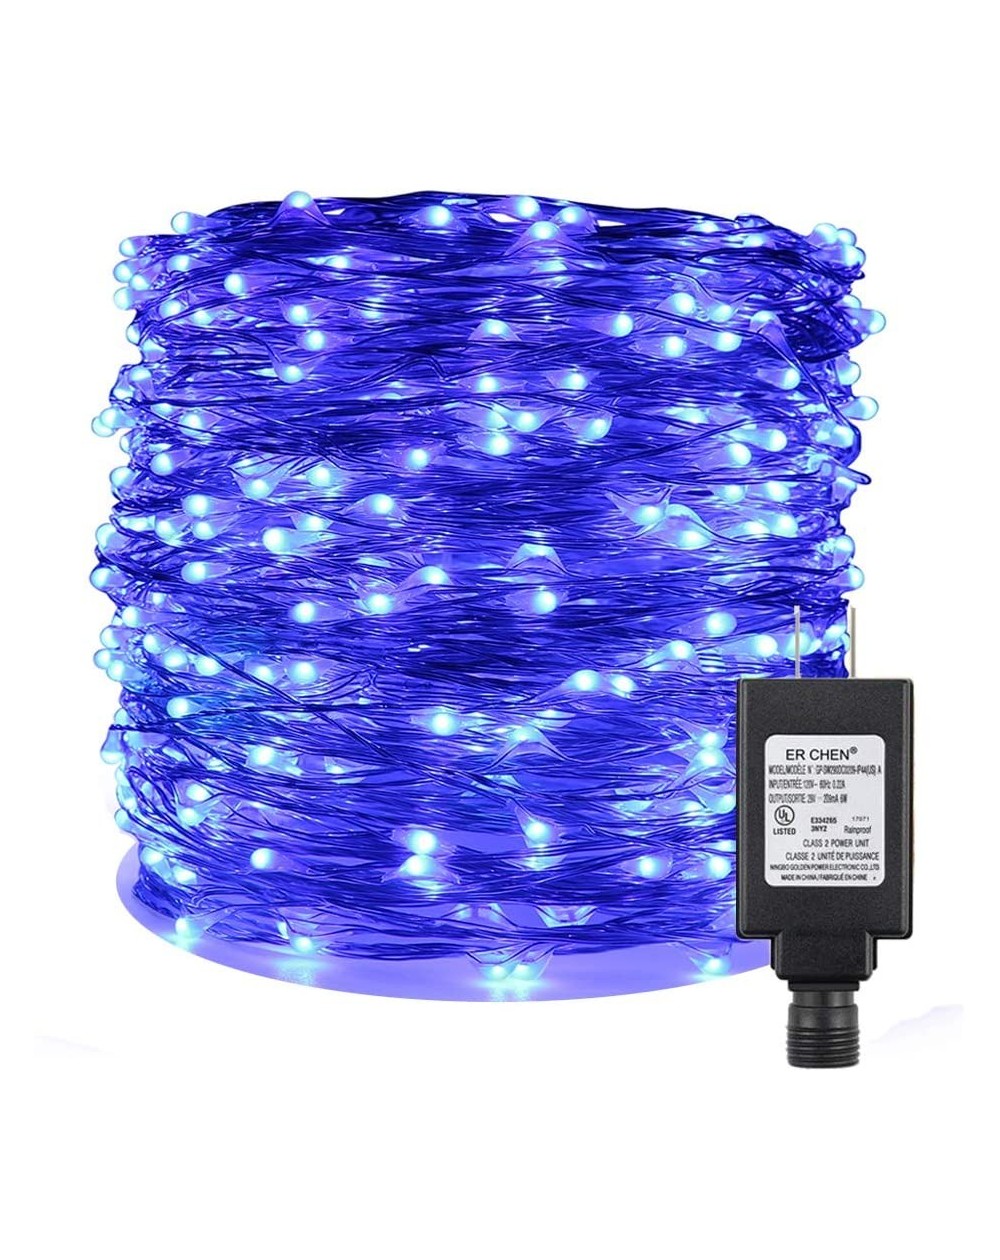 Outdoor String Lights Fairy Lights Plug in- 164Ft/50M 500 LED Silver Coated Copper Wire Starry String Lights Outdoor/Indoor D...